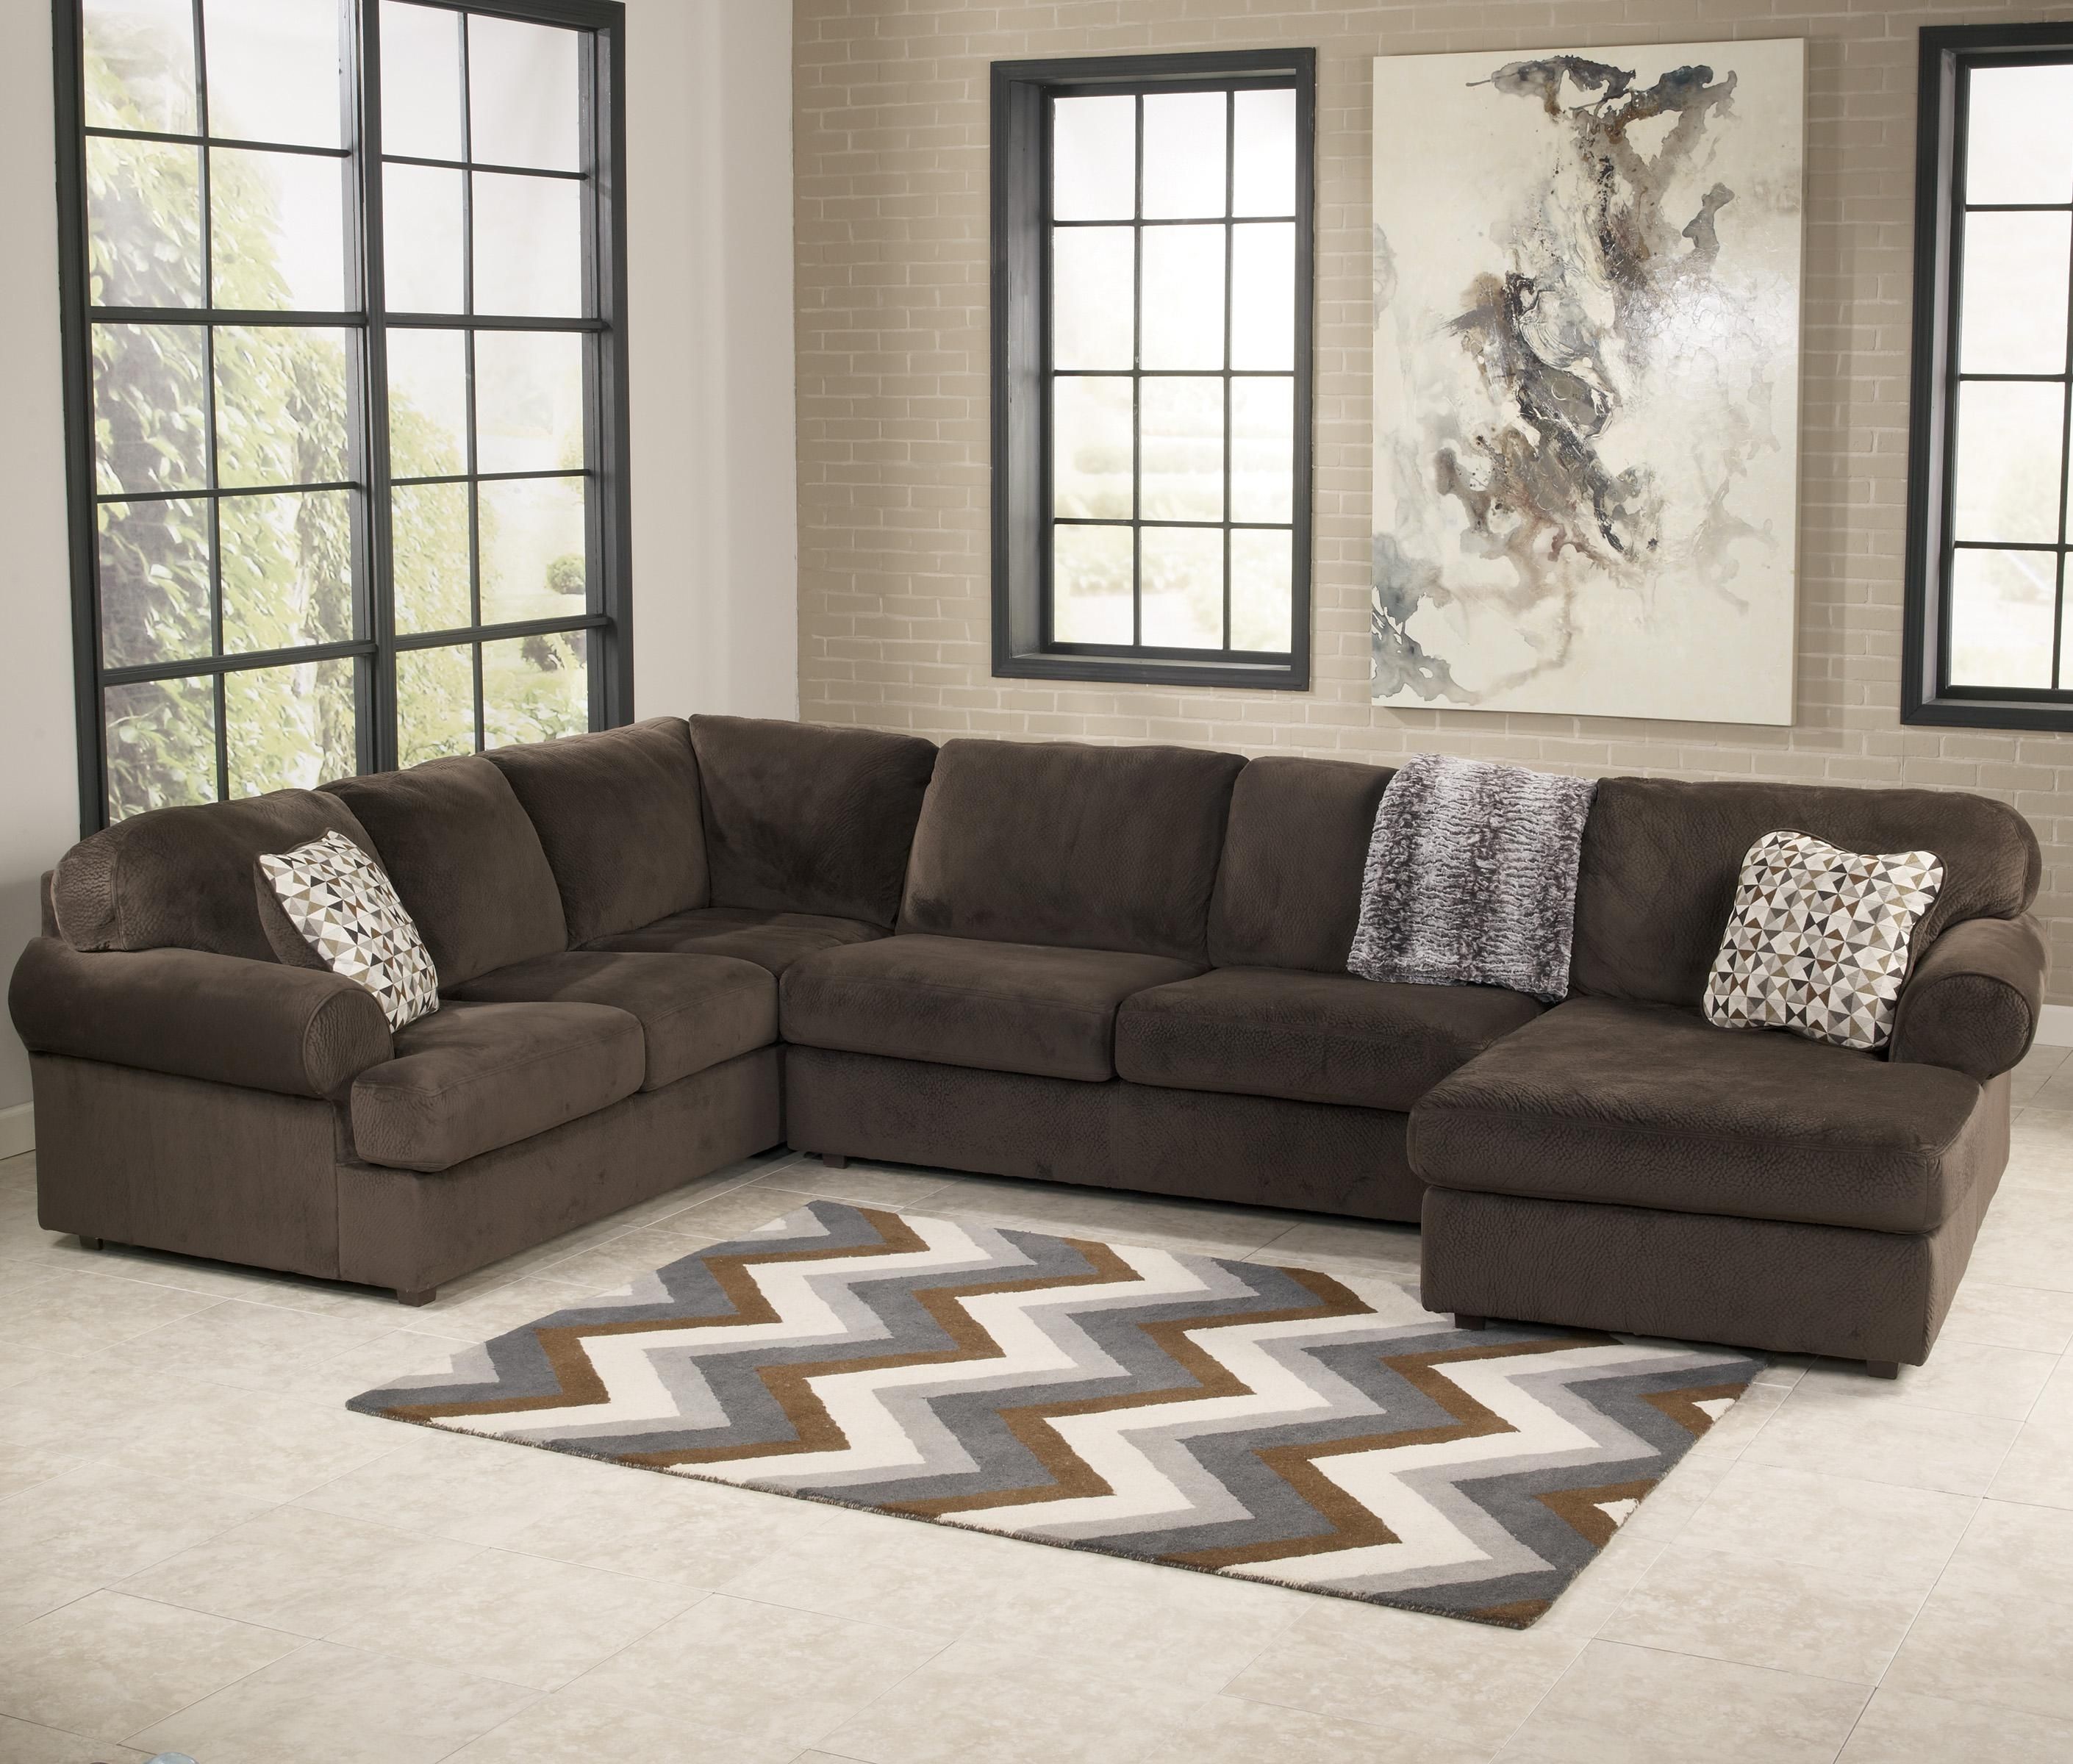 Signature Designashley Jessa Place – Chocolate Casual Sectional For Peterborough Ontario Sectional Sofas (View 2 of 10)